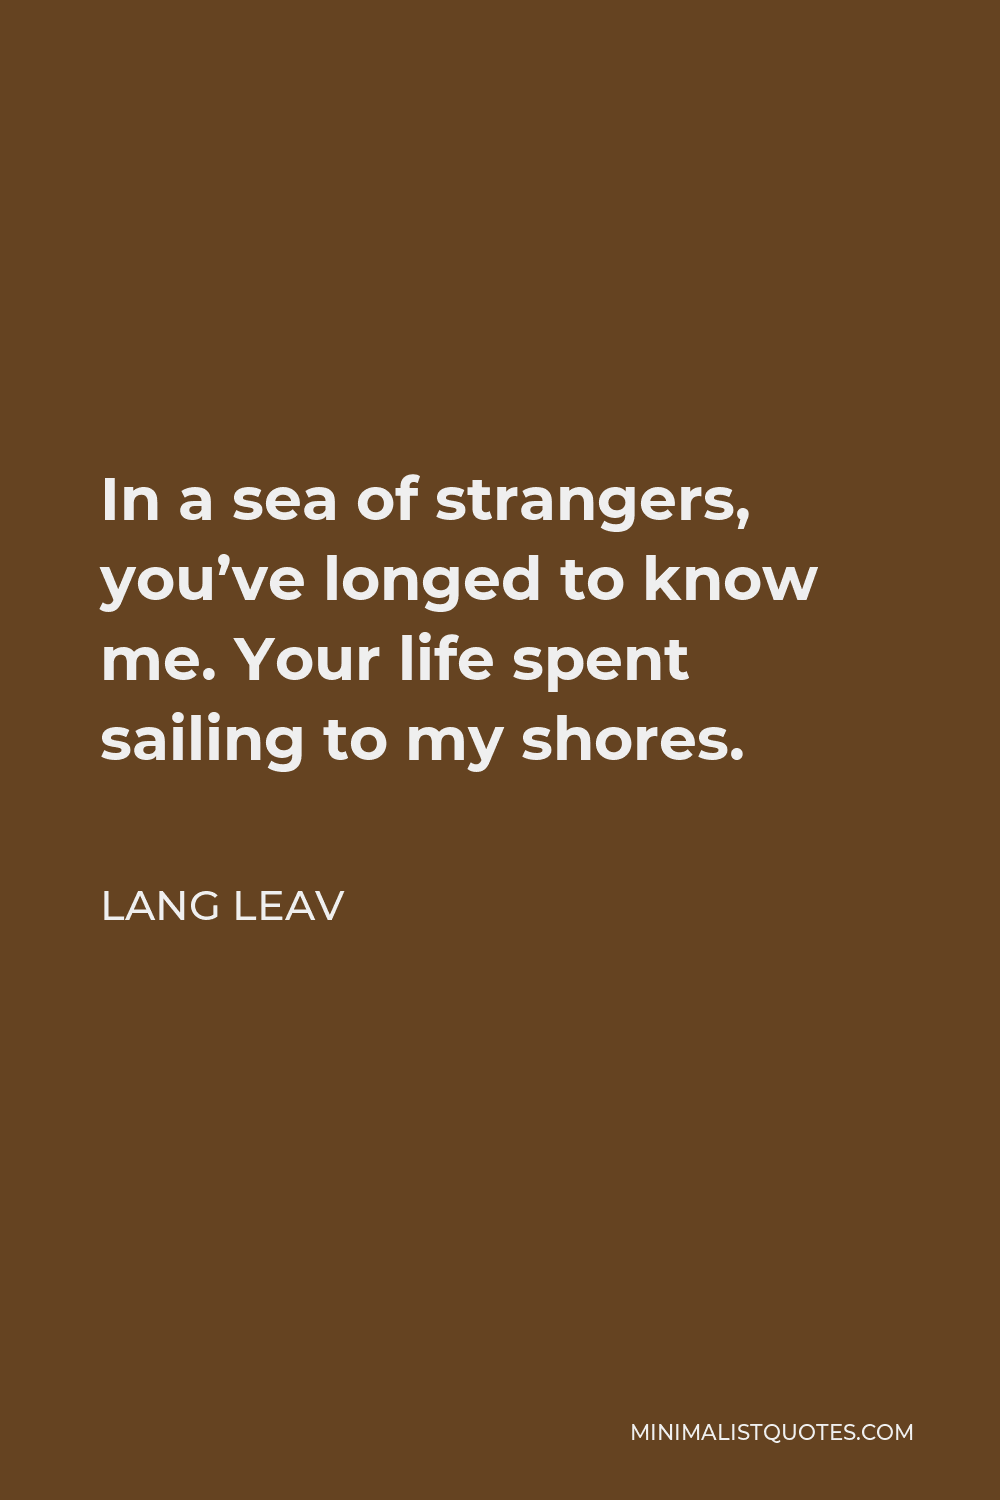 Lang Leav Quote - In a sea of strangers, you’ve longed to know me. Your life spent sailing to my shores.